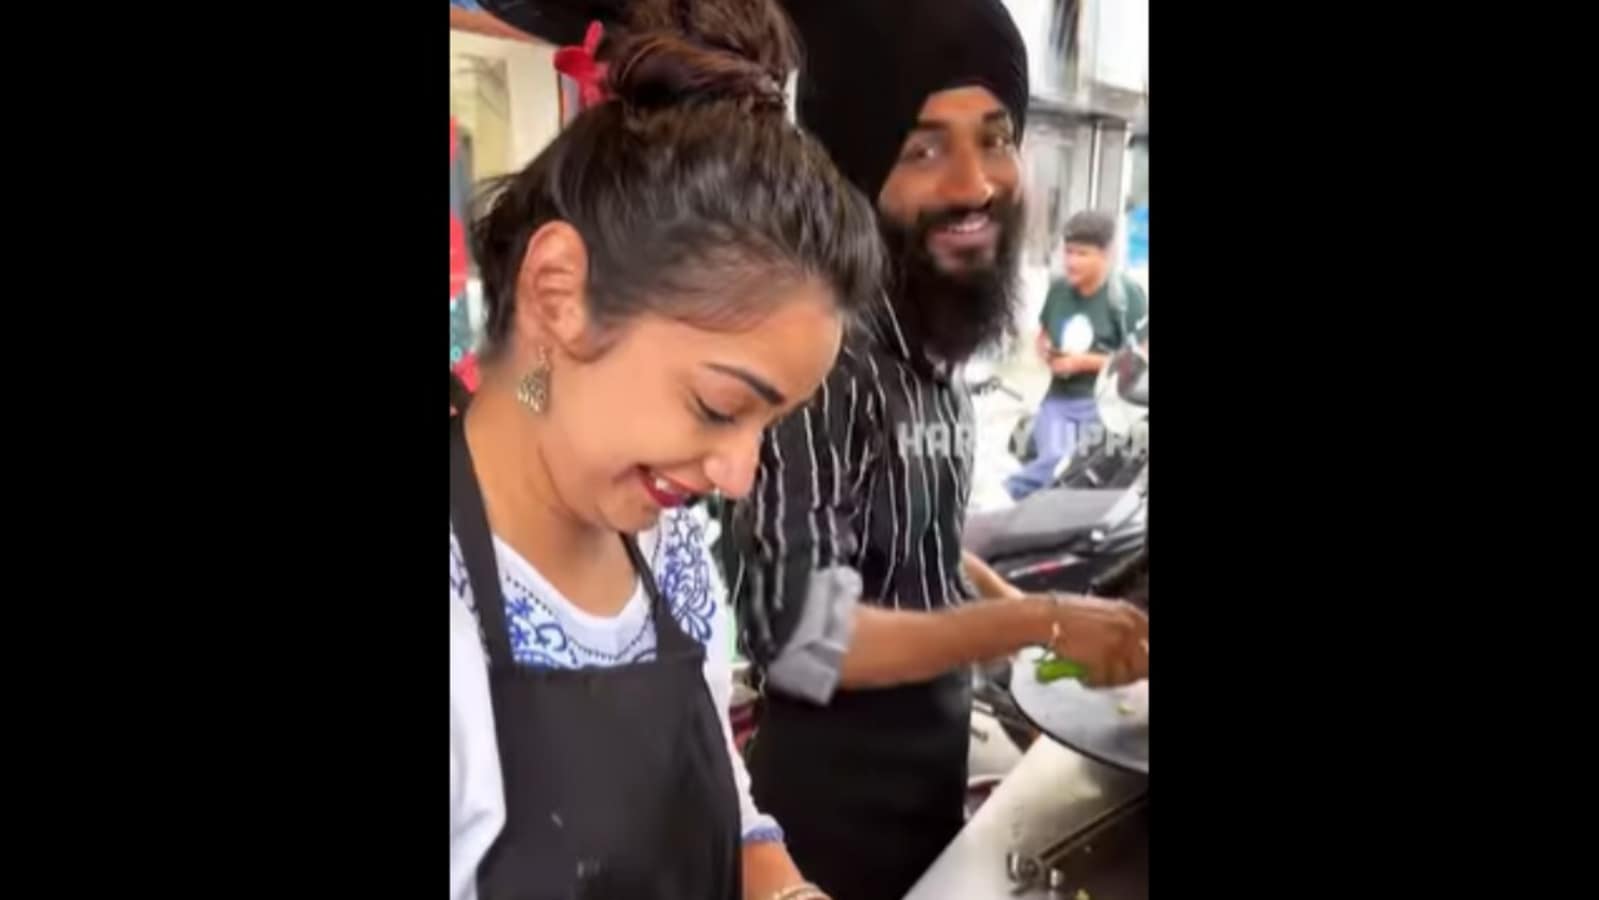 This young couple from Punjab has gone viral for selling pizza together picture photo photo